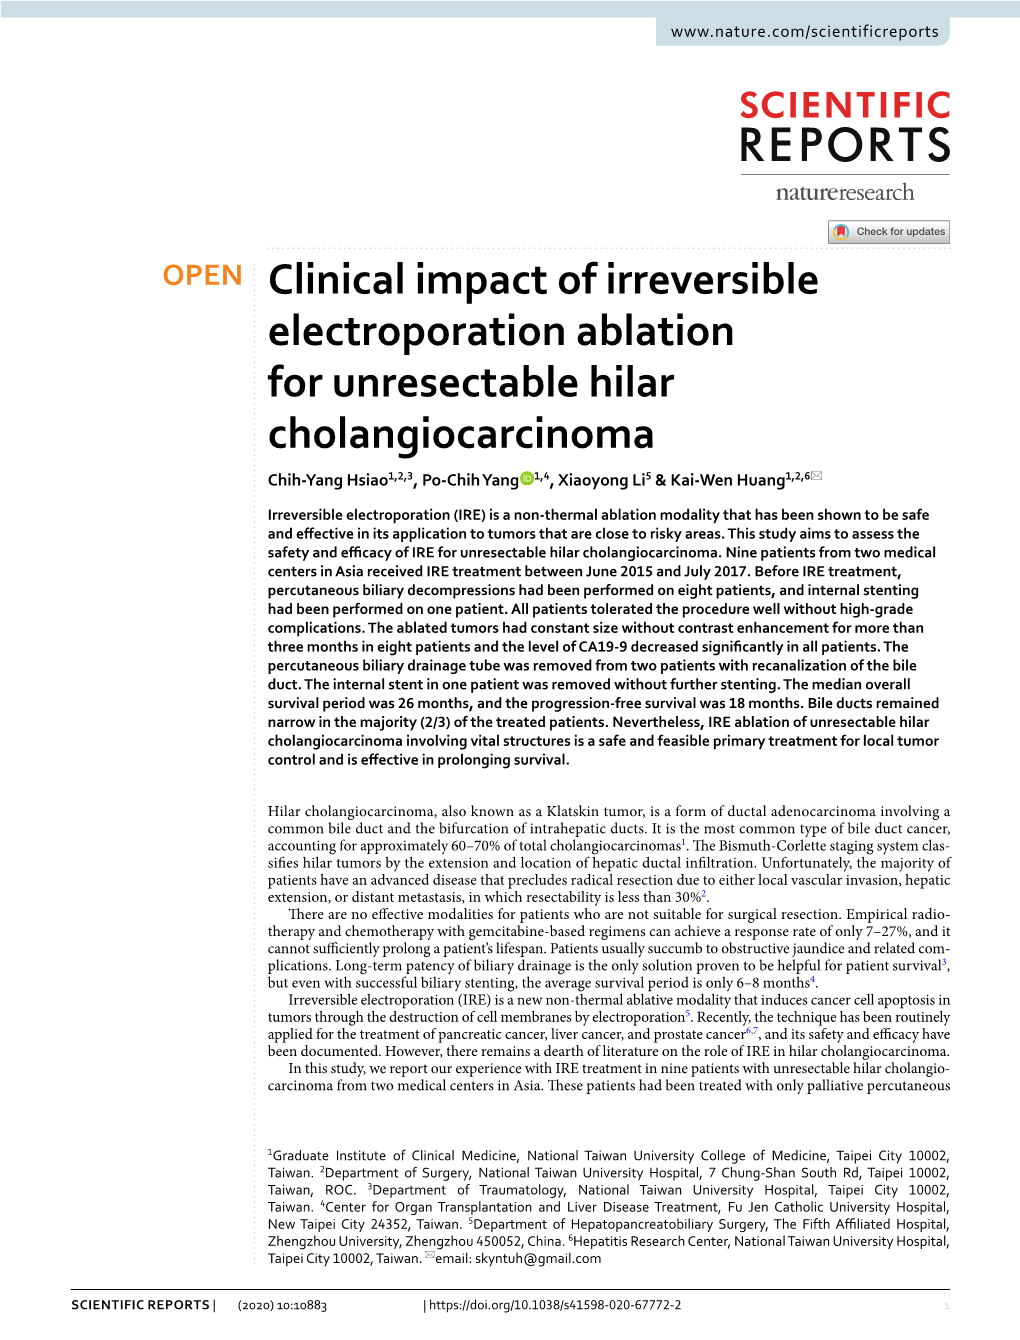 Clinical Impact of Irreversible Electroporation Ablation For